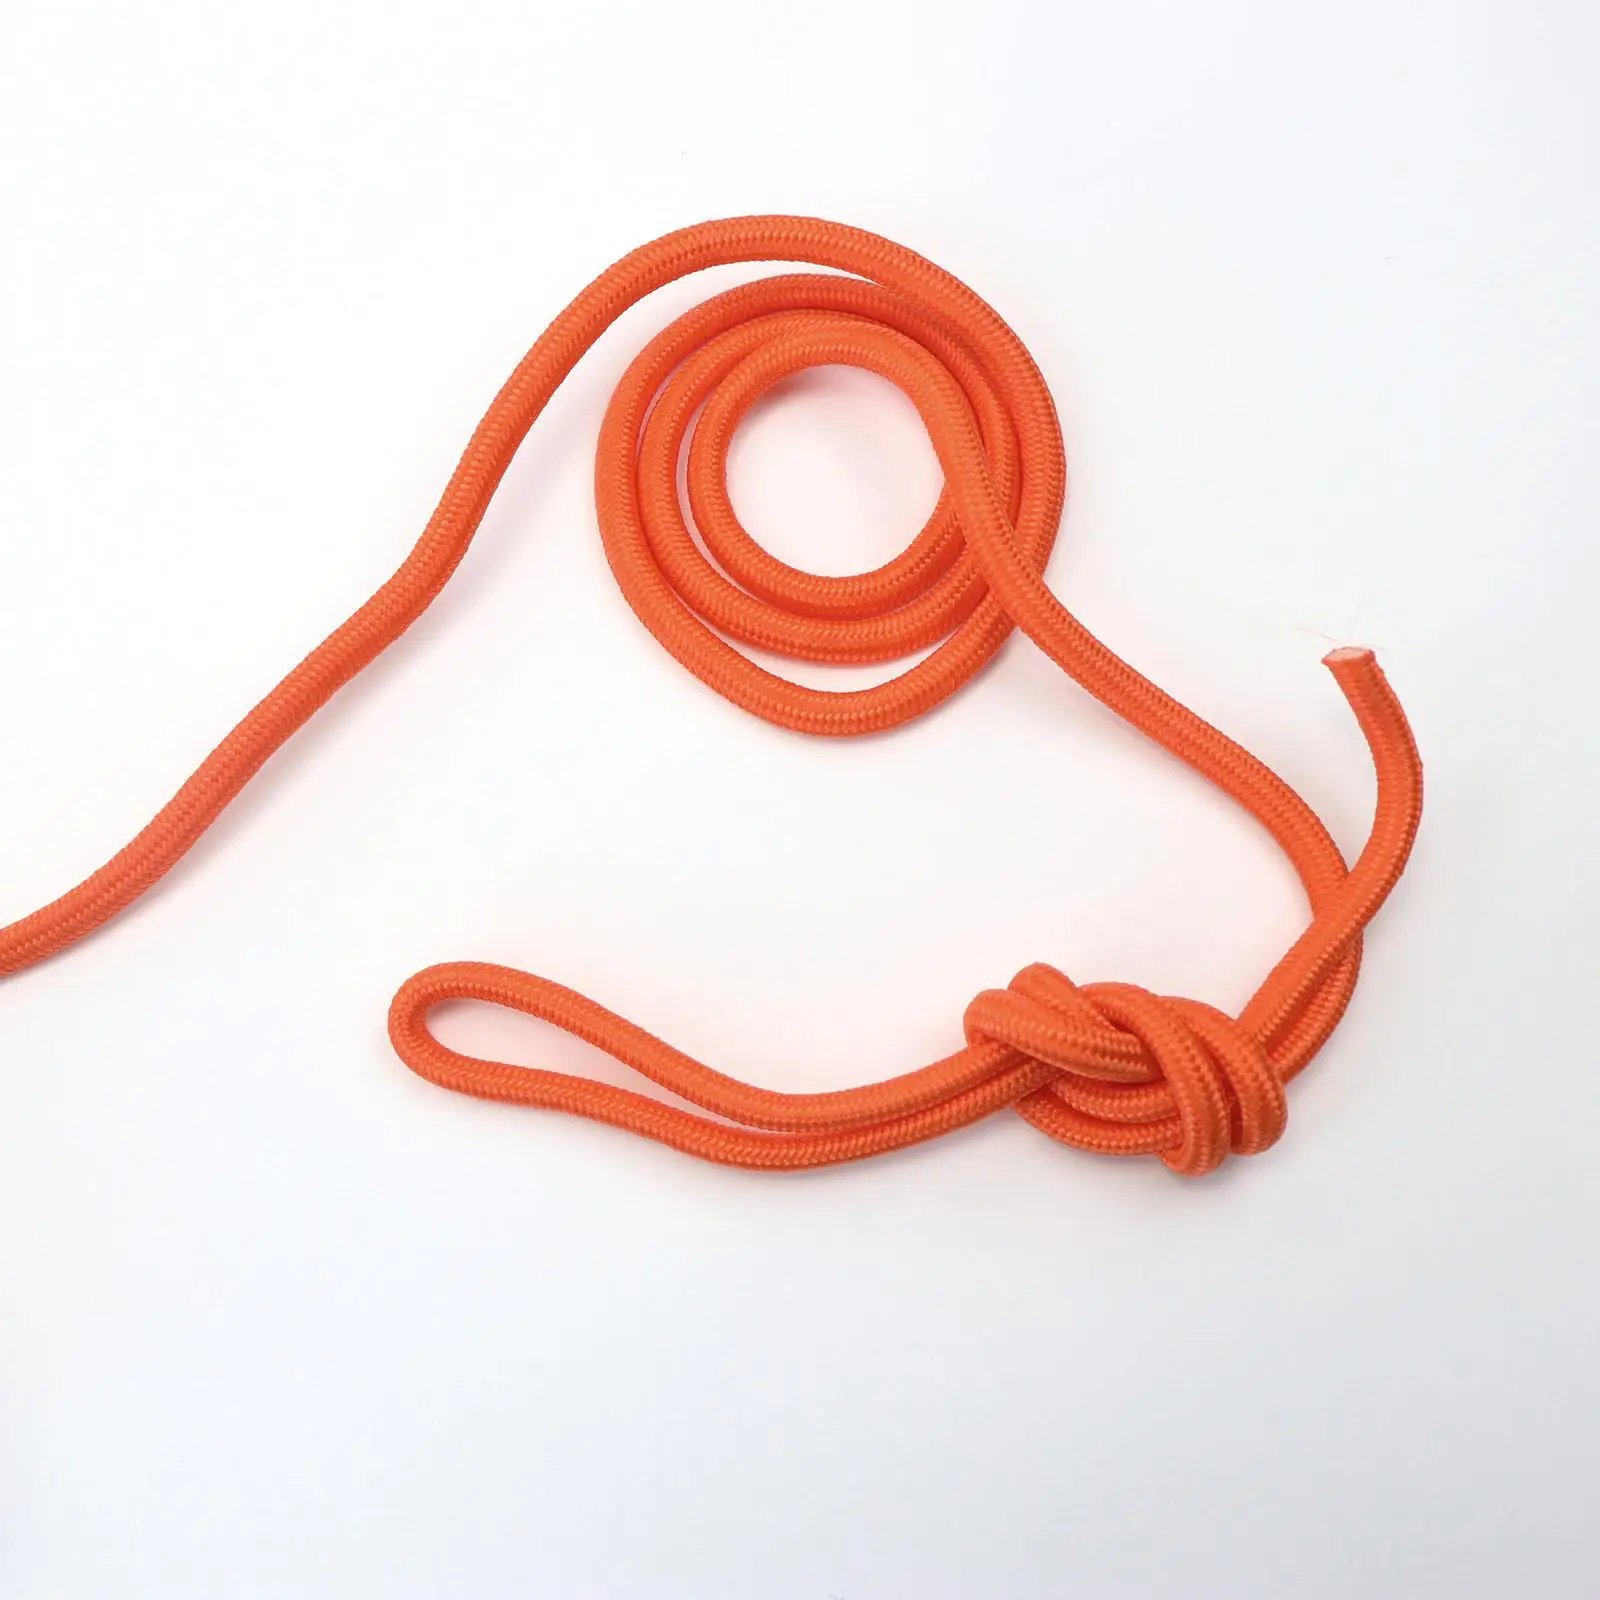 

Throw Bag for Water Rescue with 52ft Throwable Rope for Fishing Boating